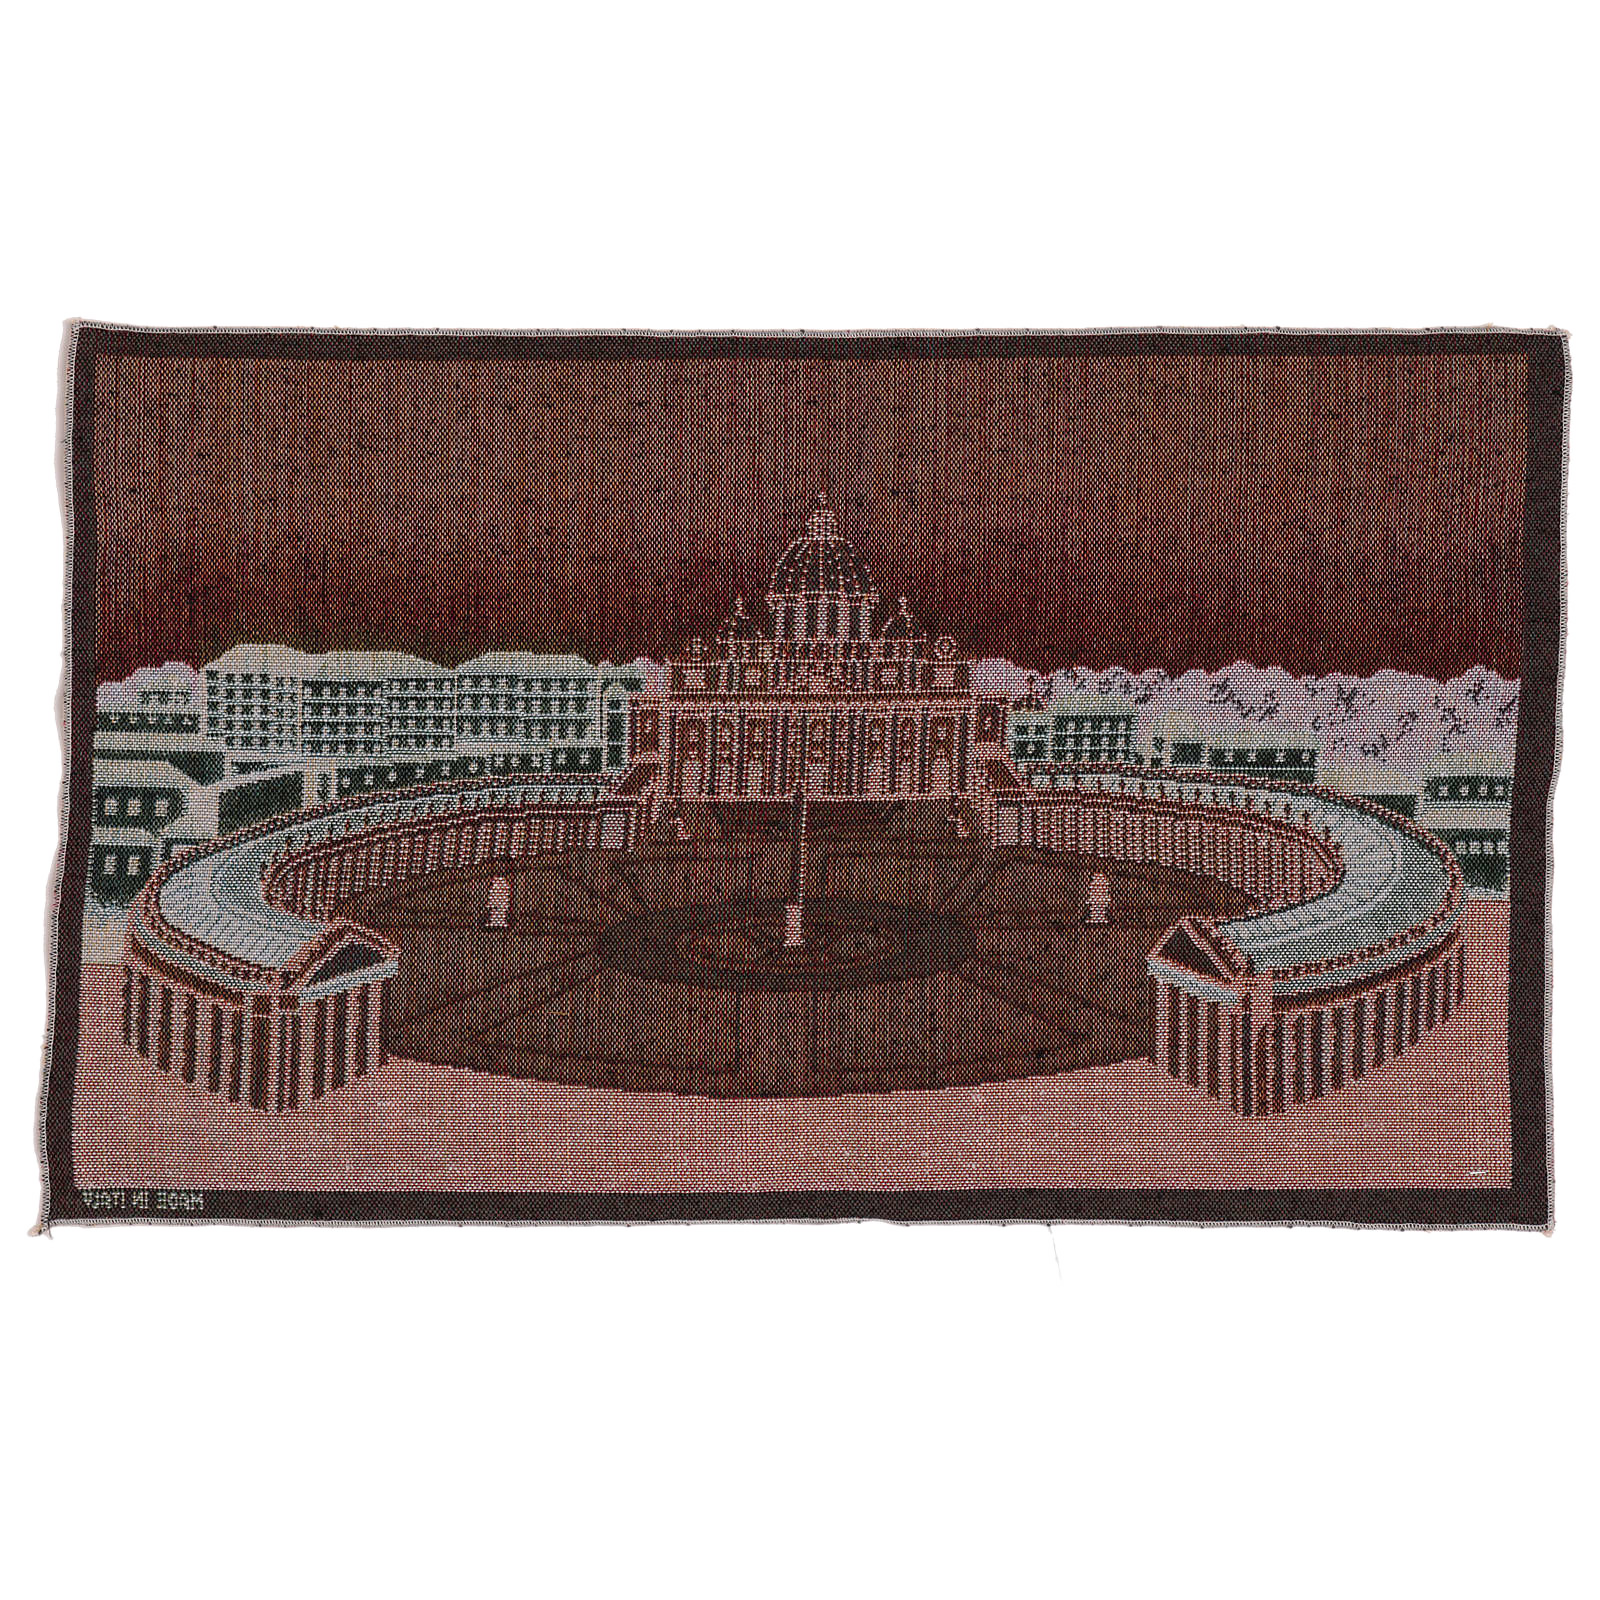 saint peter's square tapestry 13.7x23.5